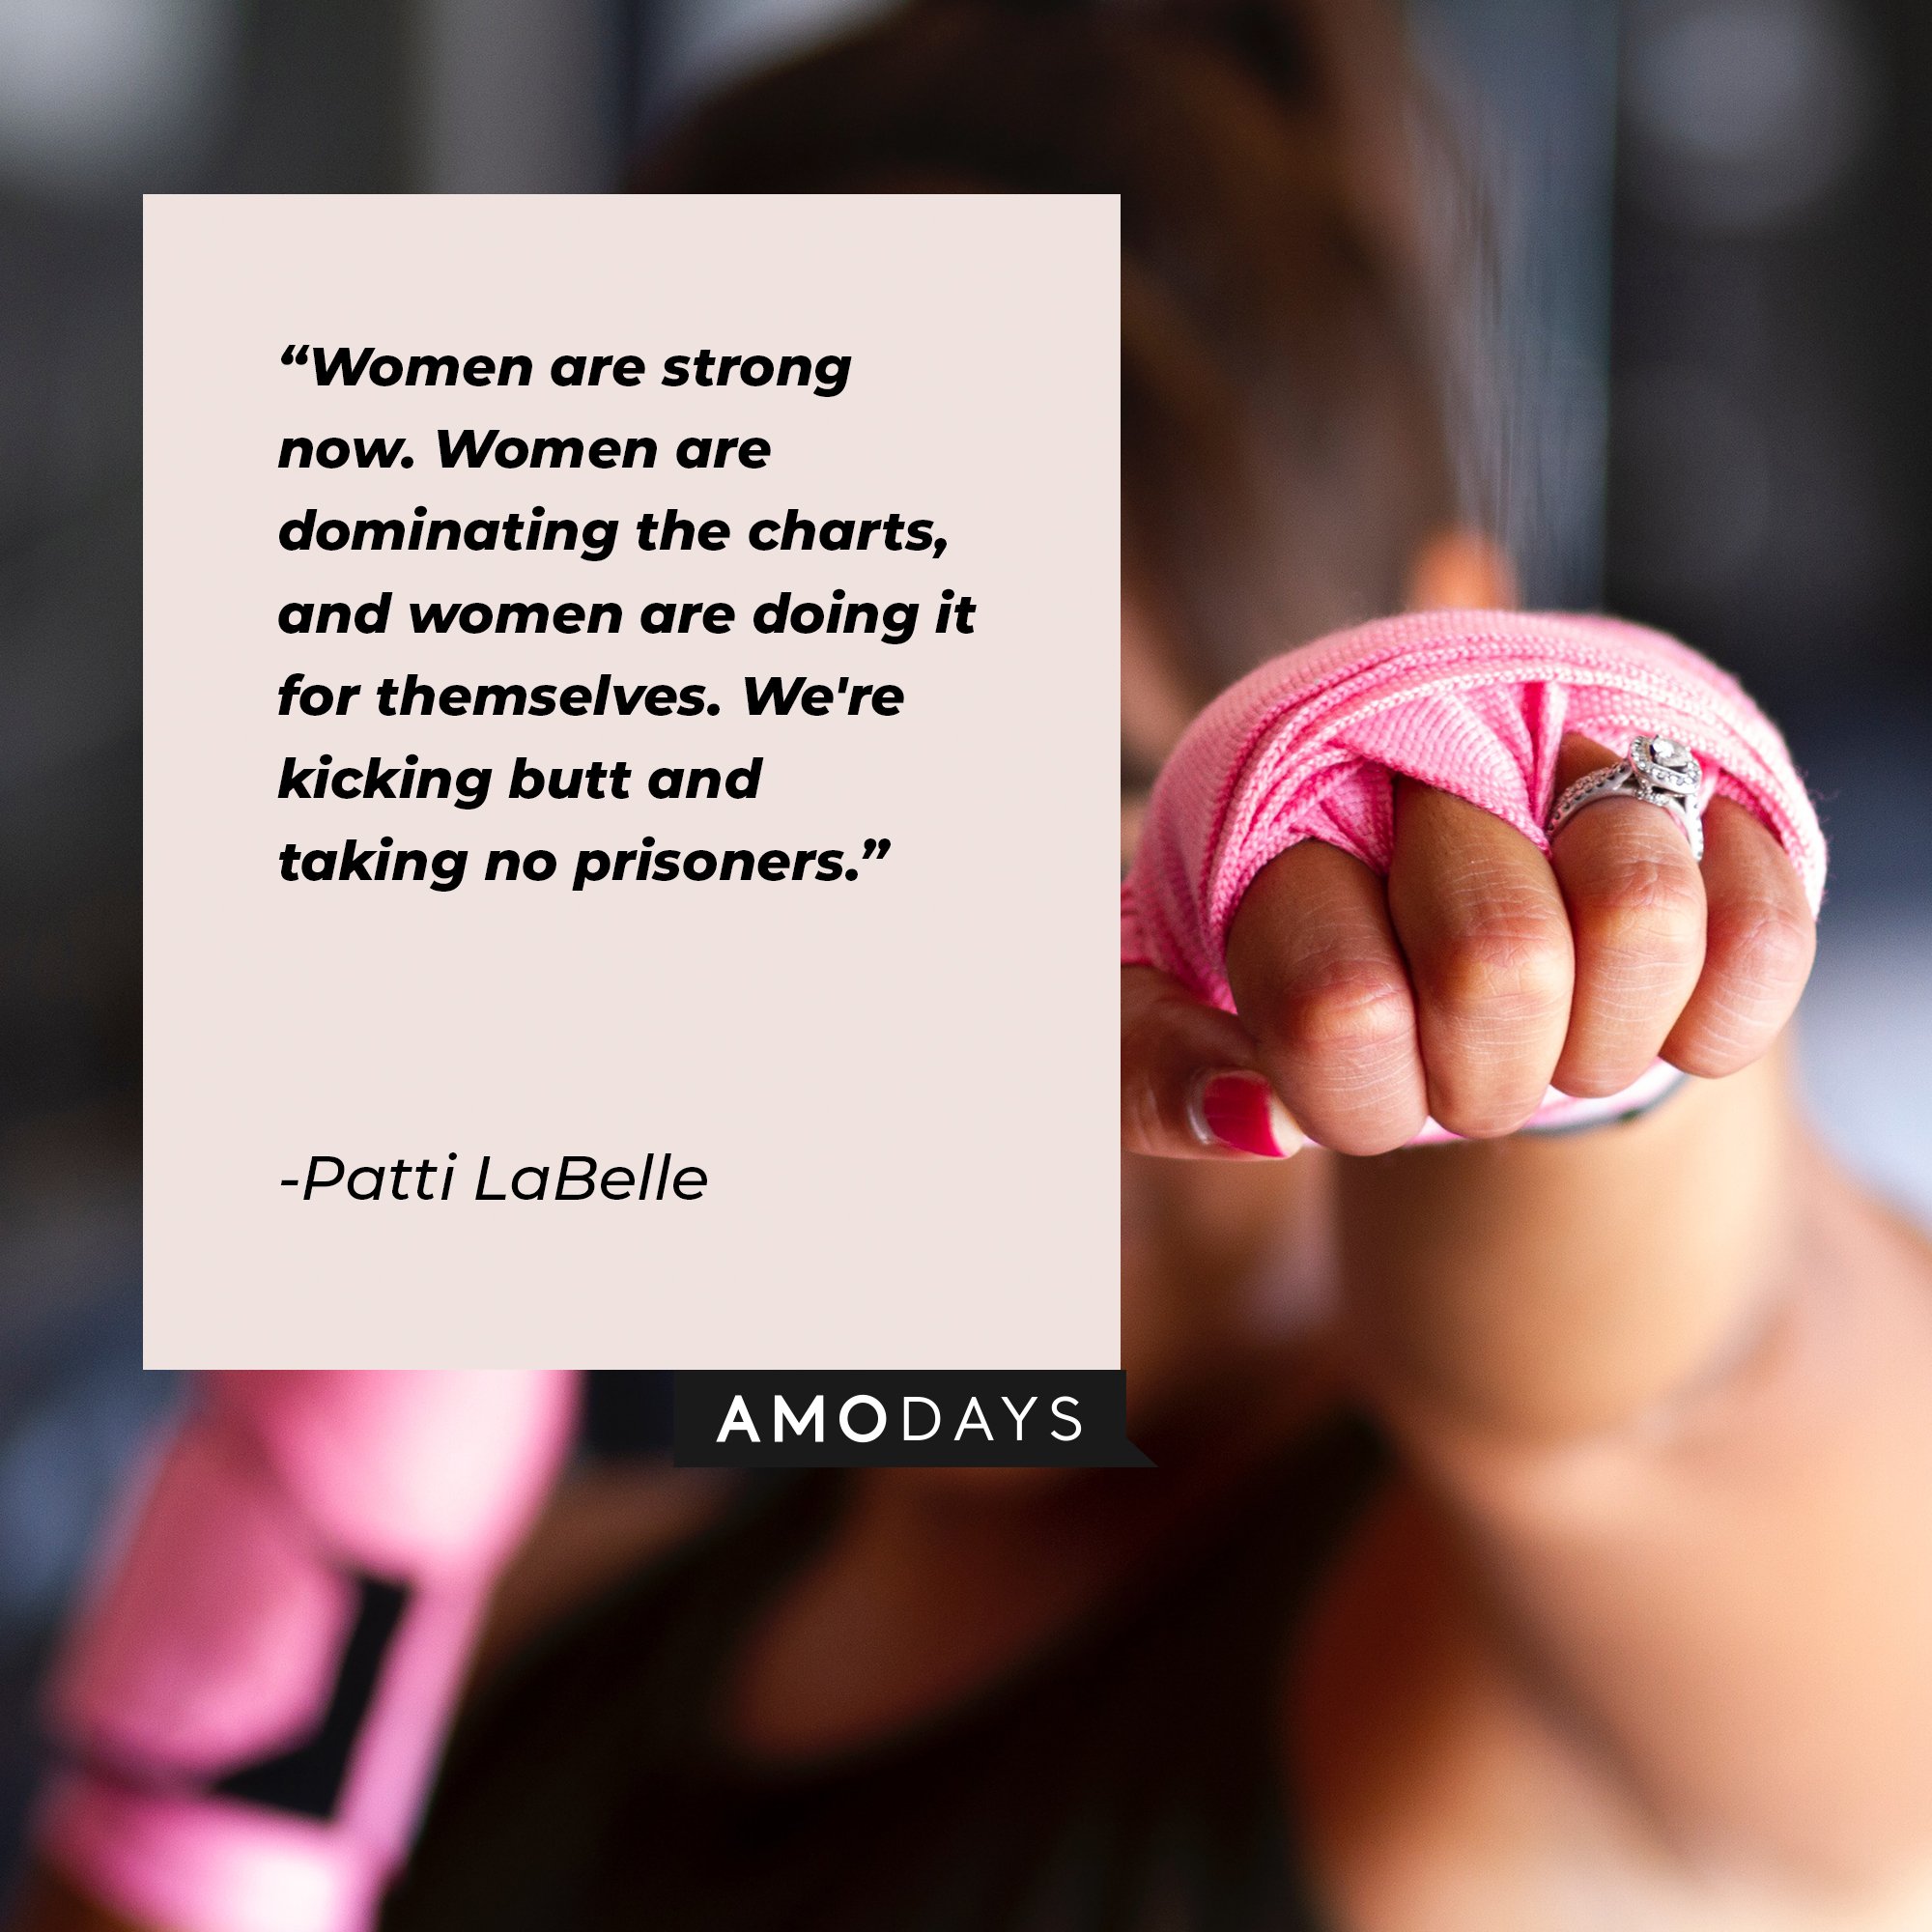 Patti LaBelle’s quote: "Women are strong now. Women are dominating the charts, and women are doing it for themselves. We're kicking butt and taking no prisoners."  | Image: AmoDays 